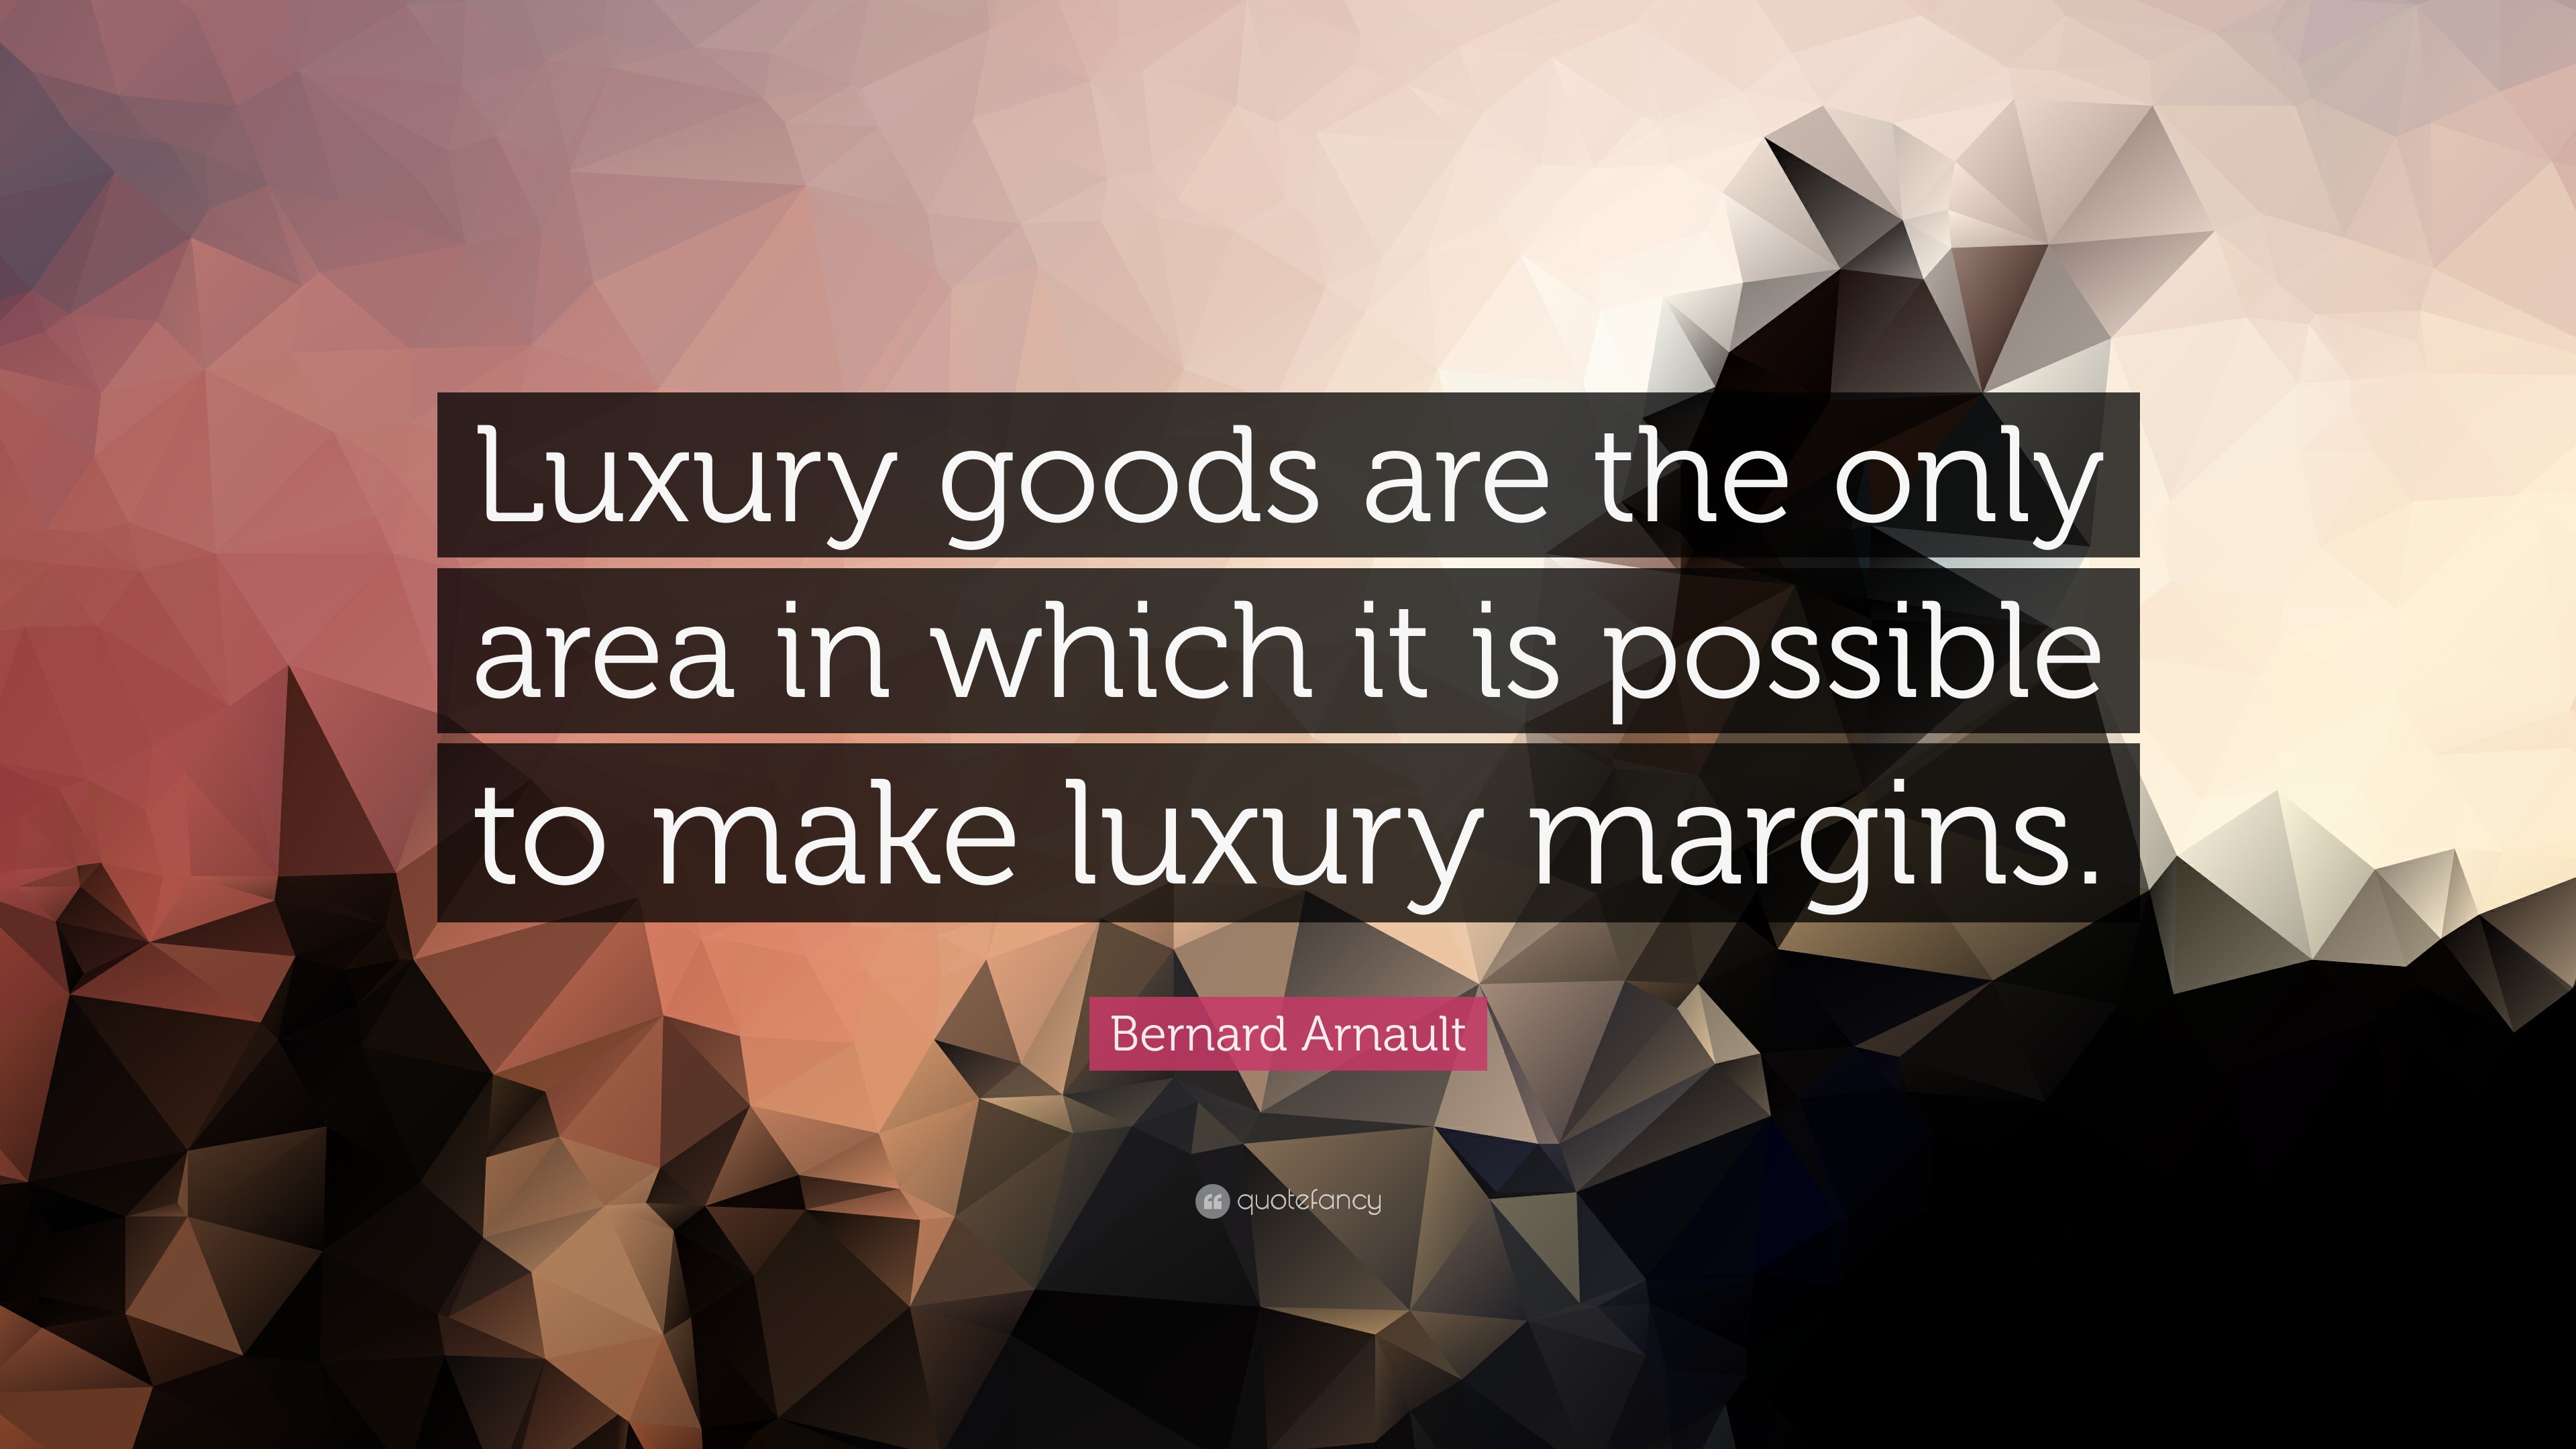 Bernard Arnault Quotes: Wisdom from the Luxury Magnate